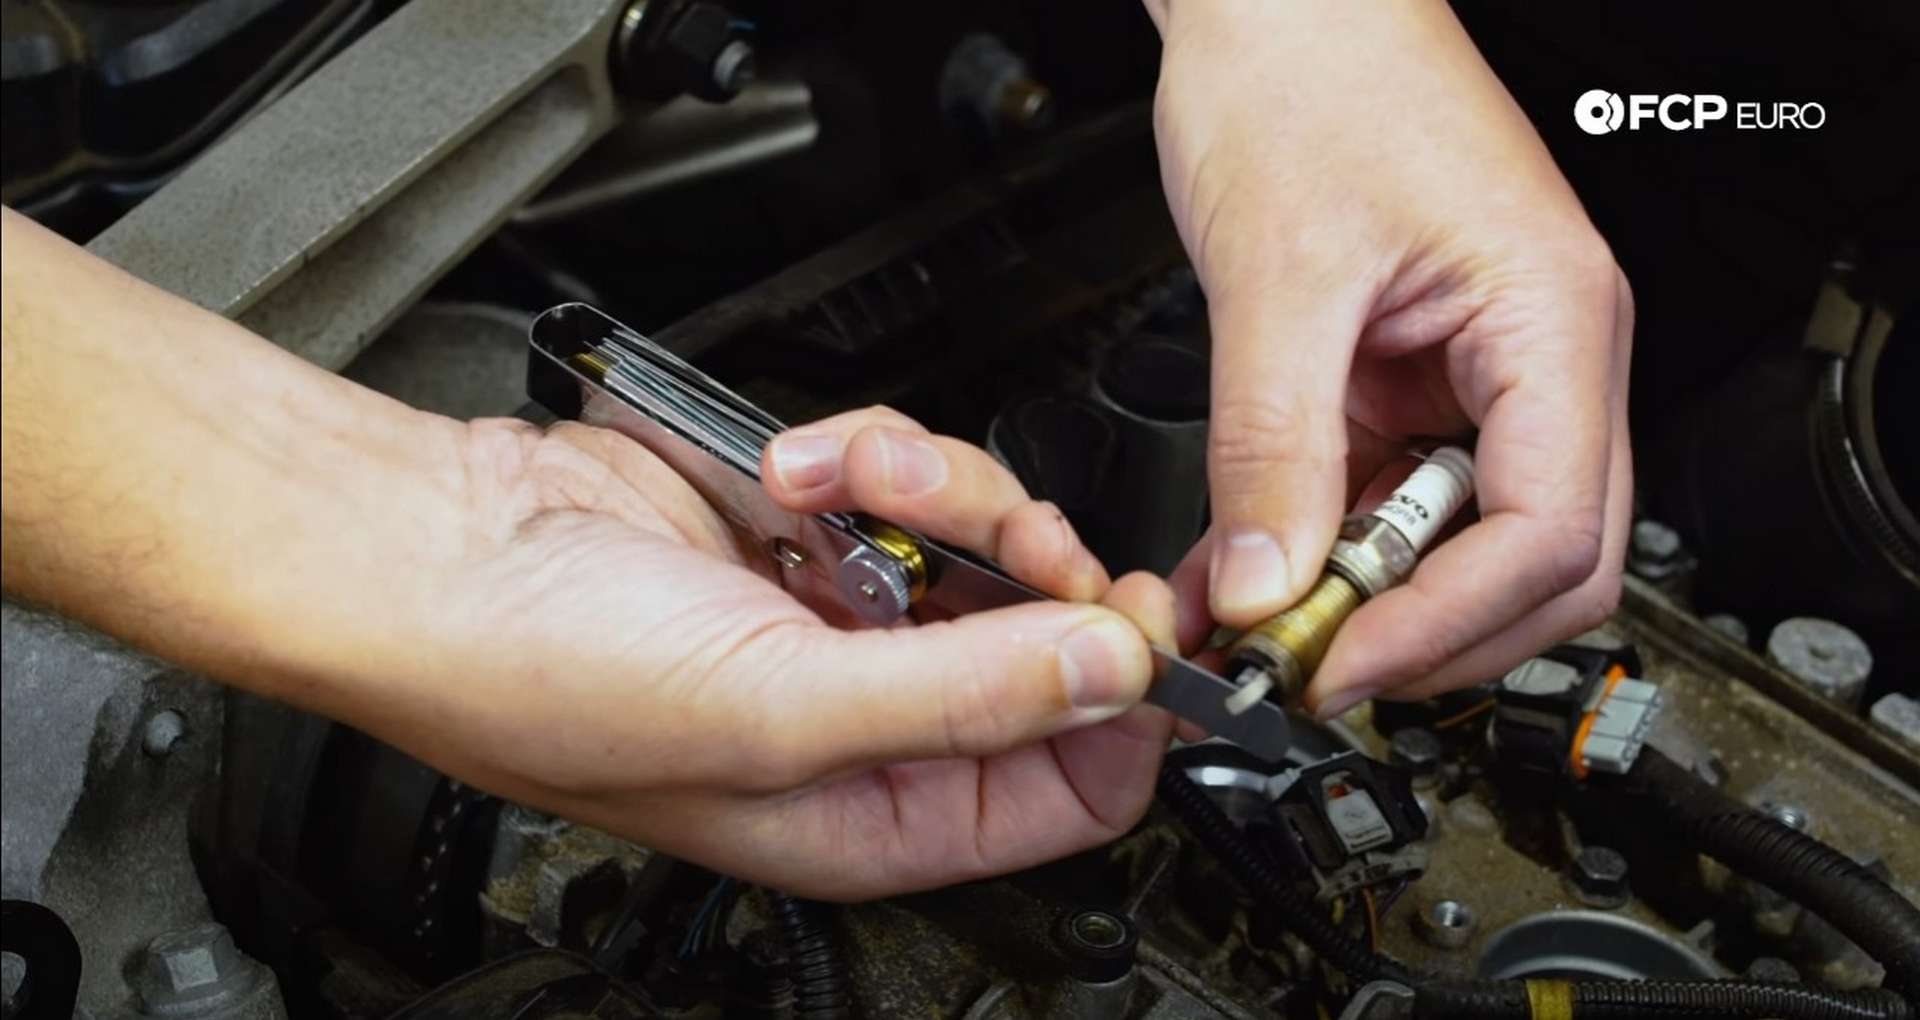 DIY Volvo Spark Plug and Ignition Coil Replacement checking the spark plug gap